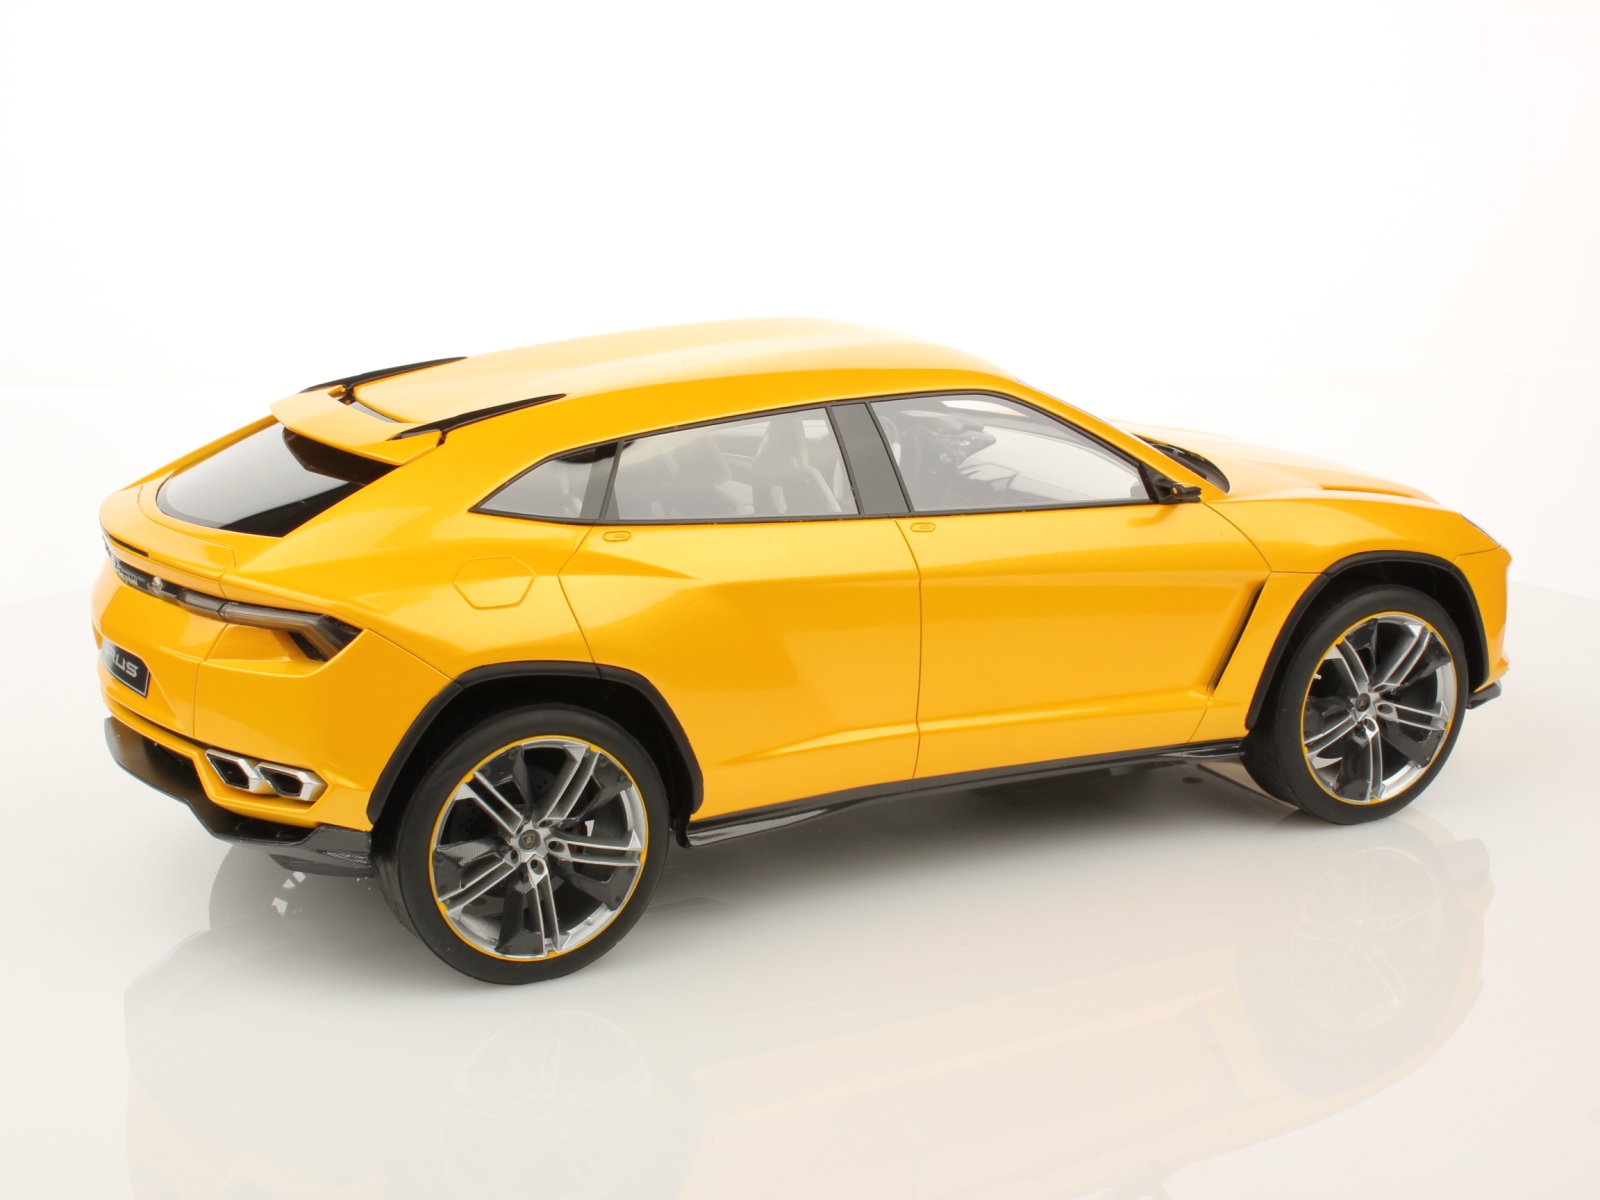 Lamborghini Urus Production Officially Confirmed for 2018 ...